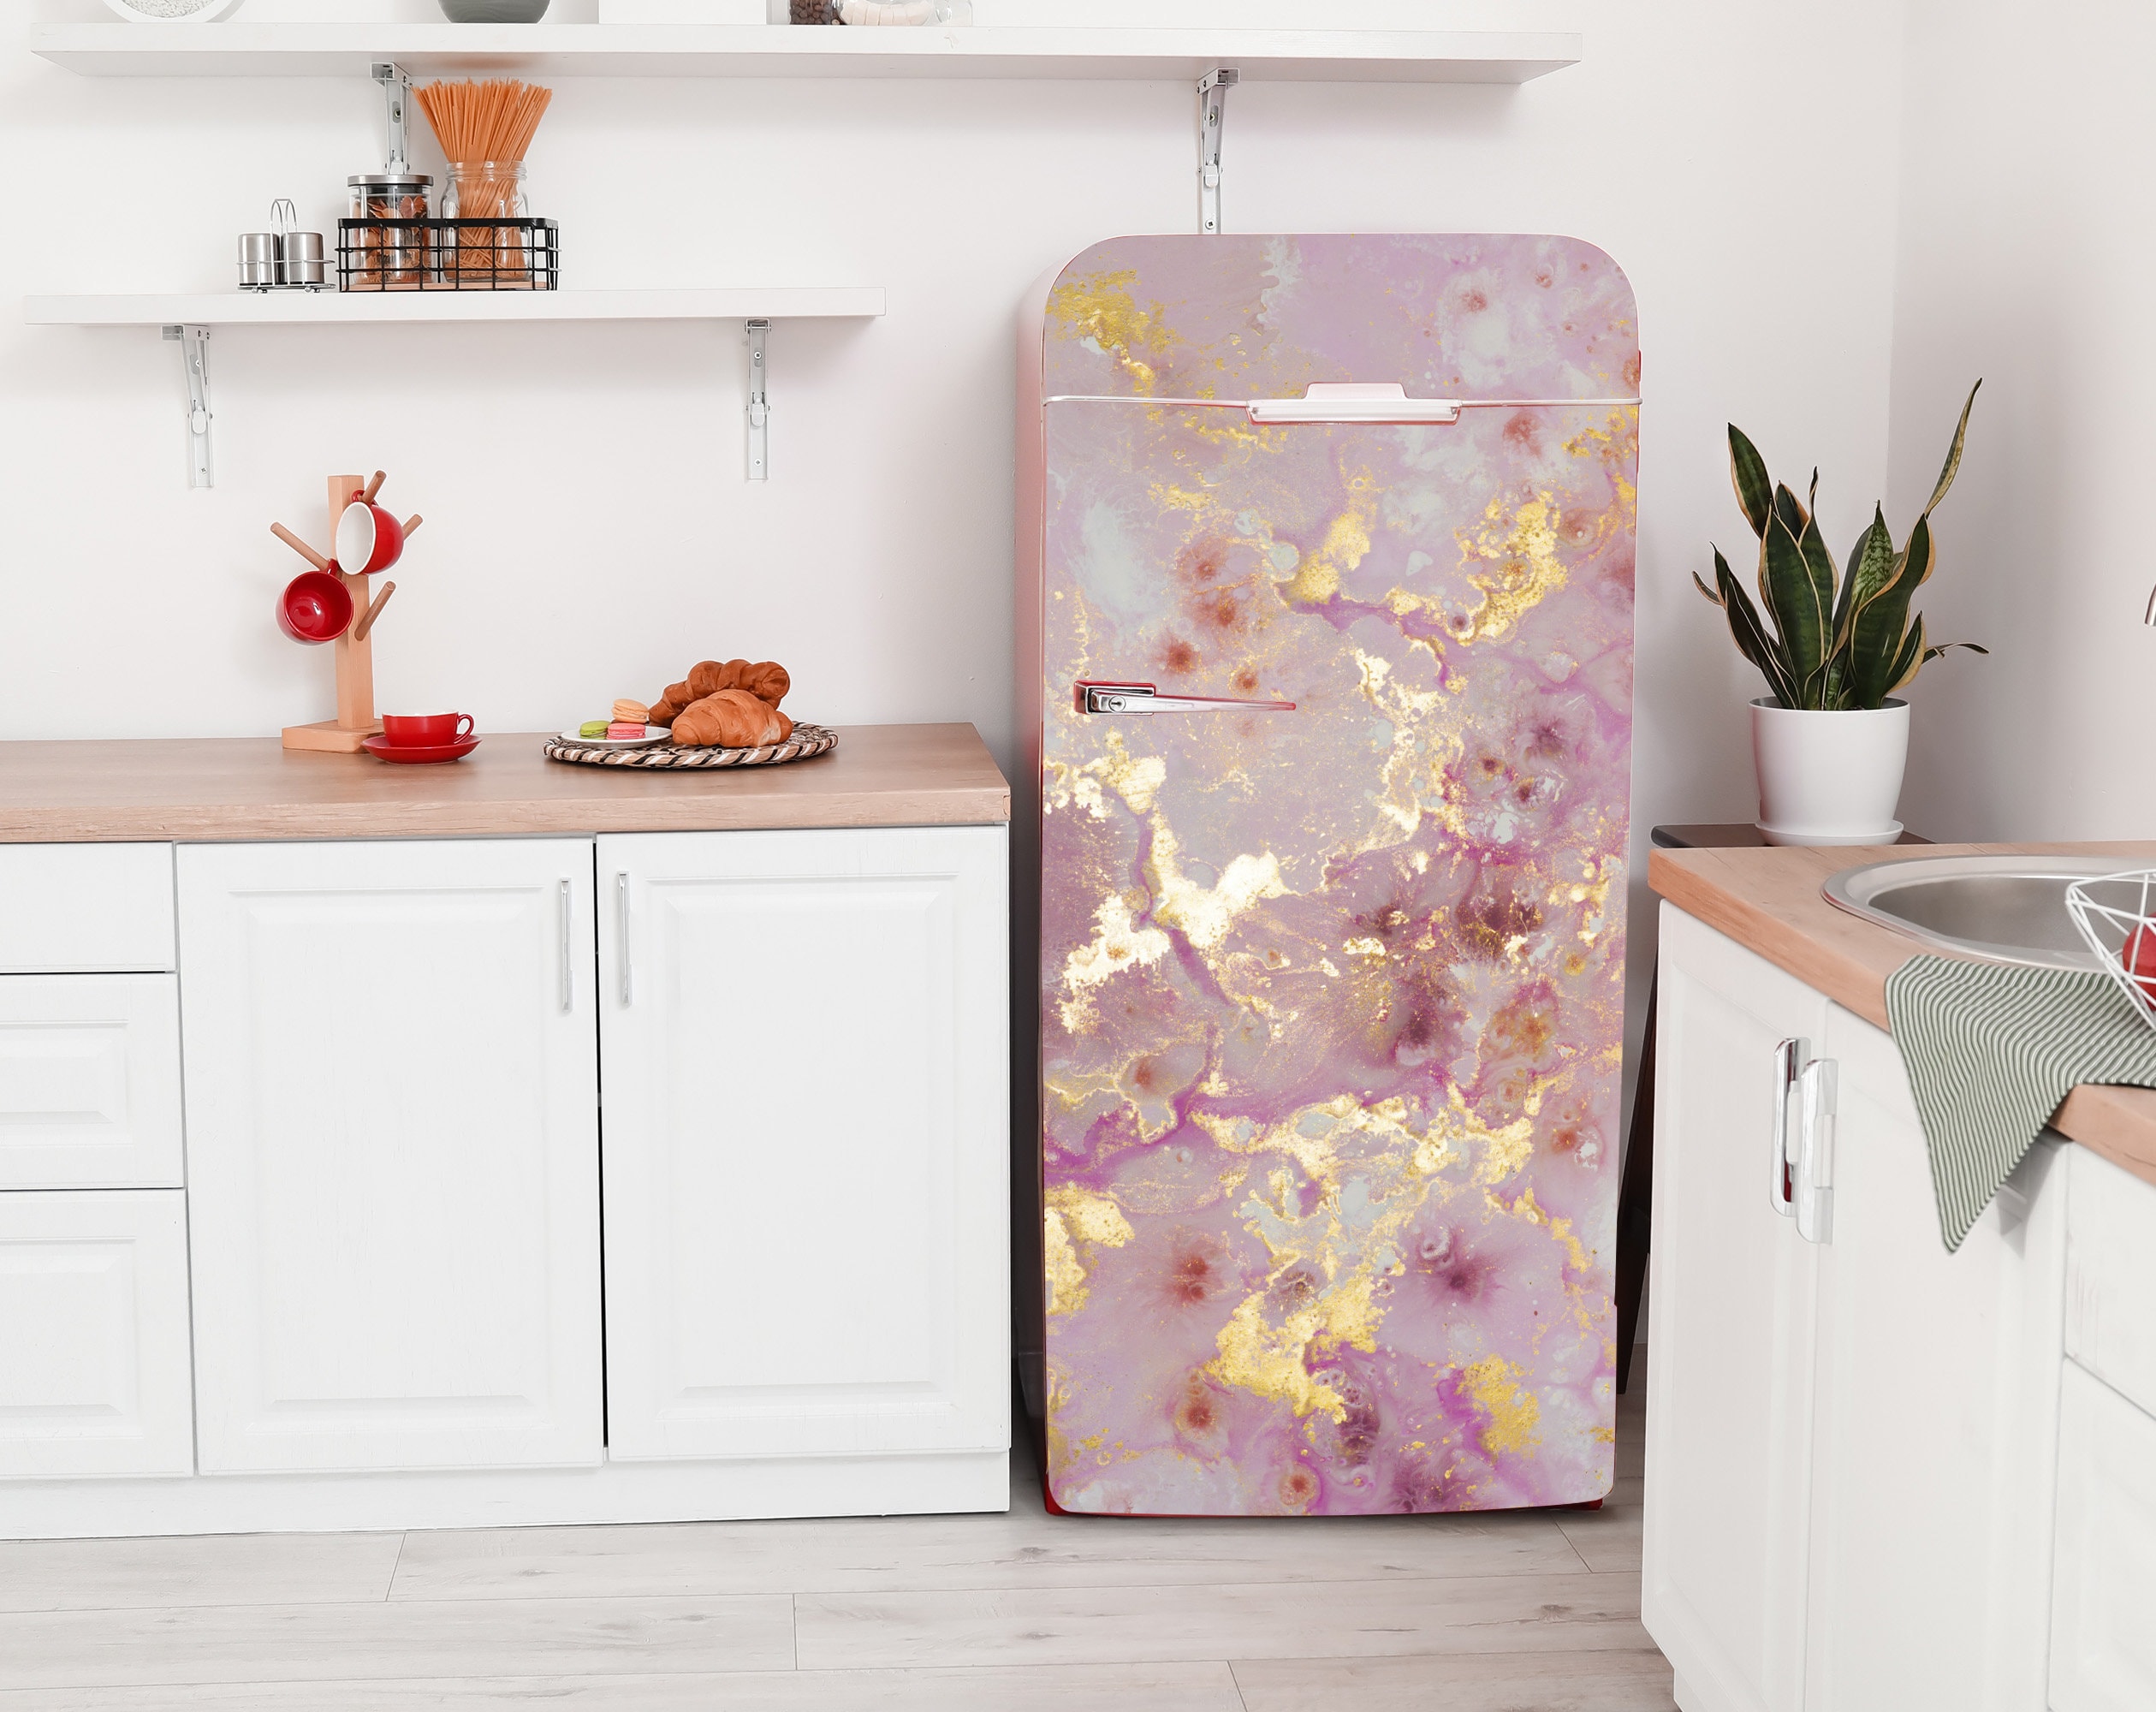 Honest Review of the Pink Smeg Fridge - Country Peony 